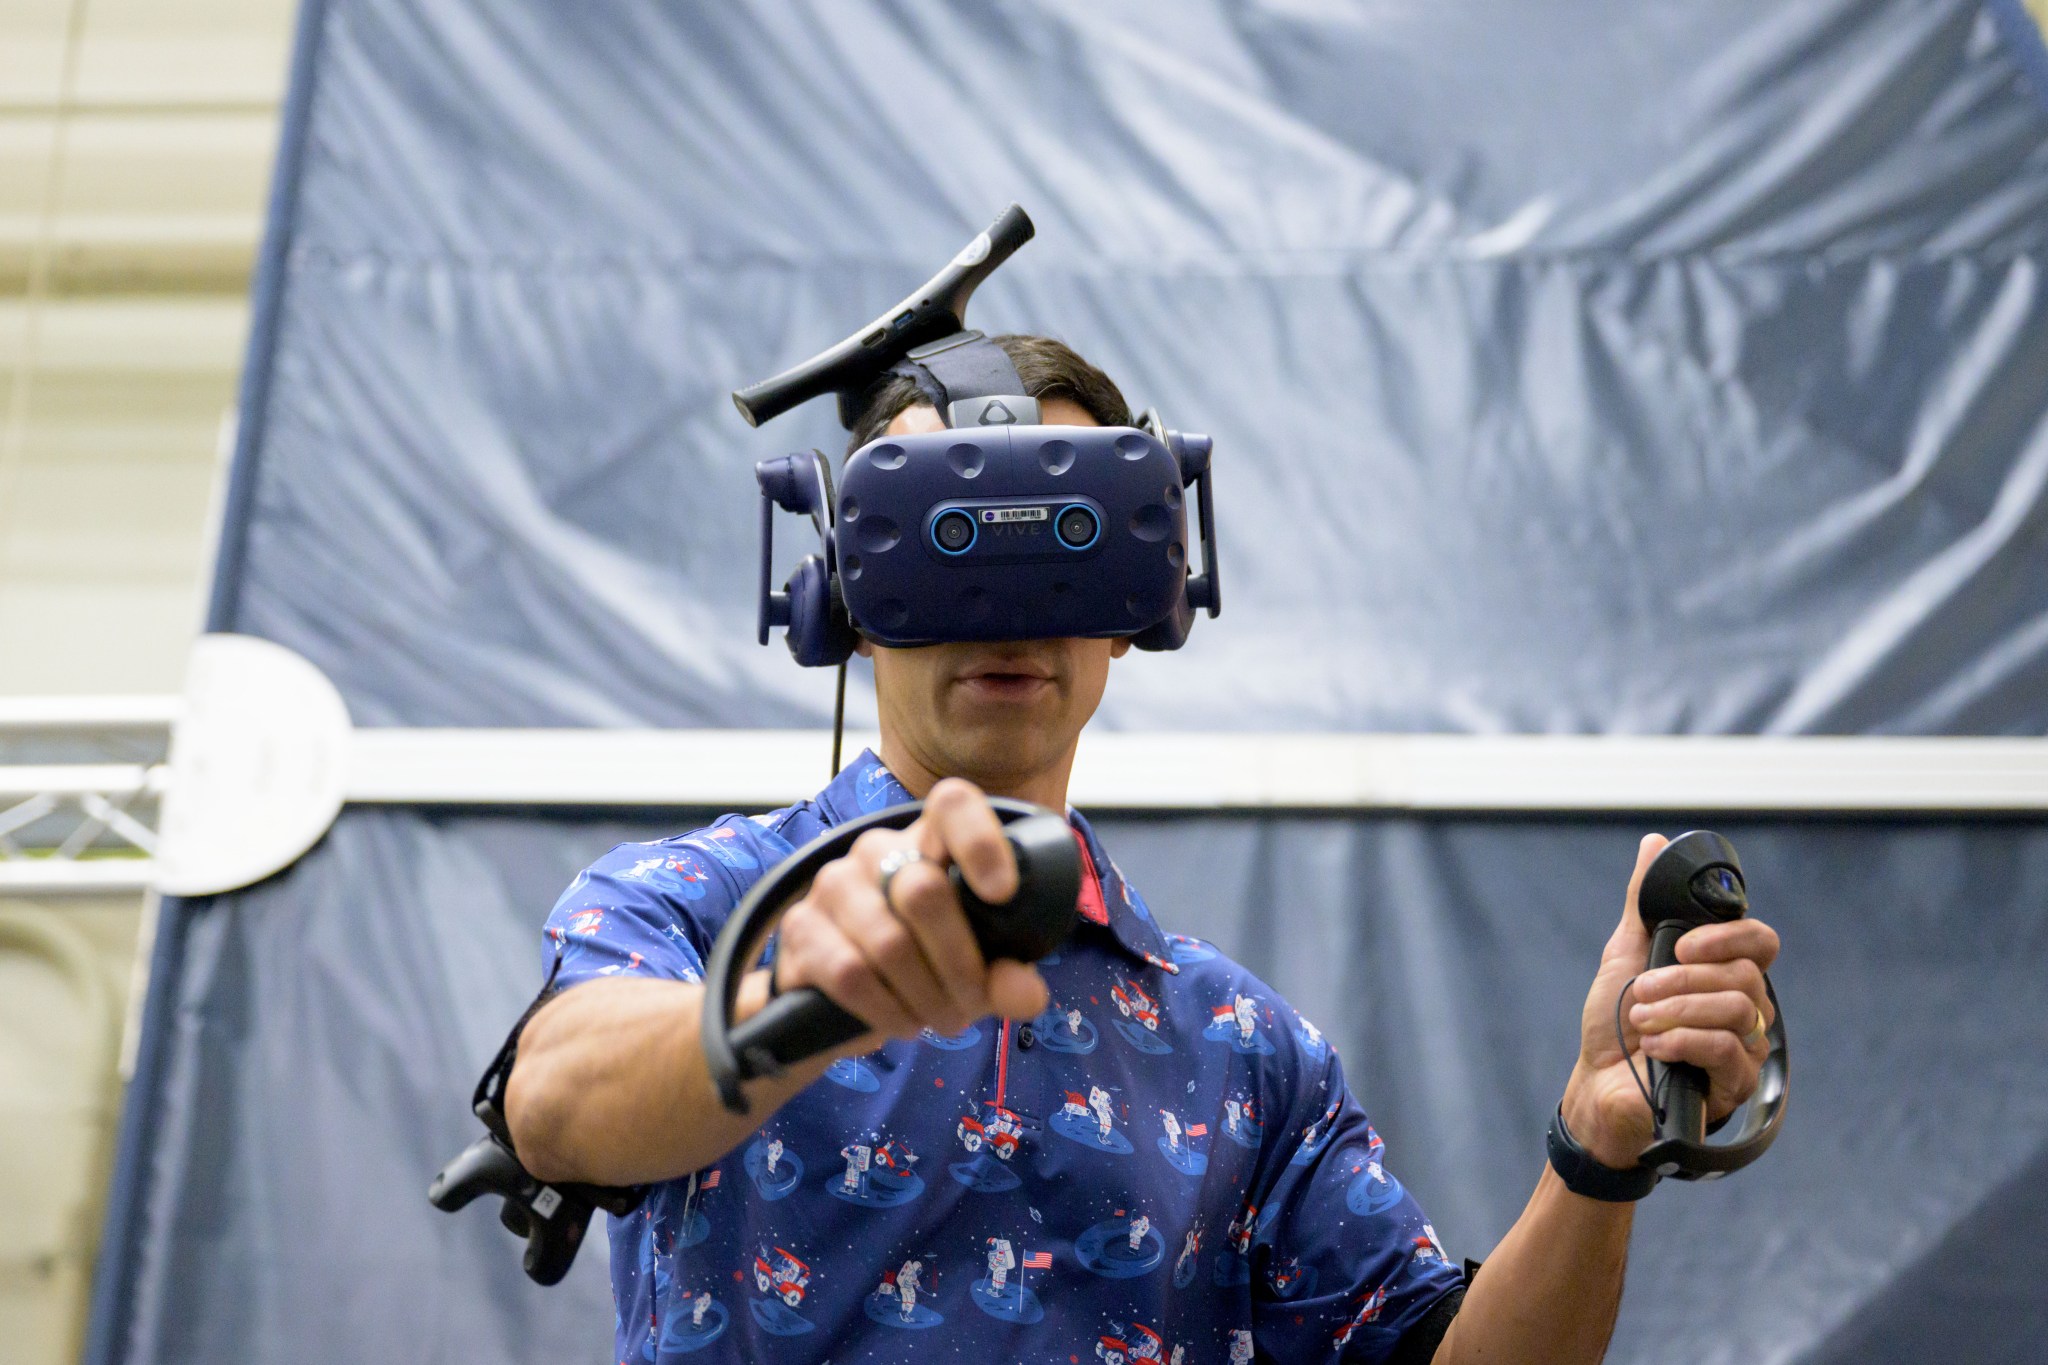 NASA Astronaut Raja Chari wearing a VR headset and holding VR controllers in both hands, immersed in training at the Virtual Reality Training Lab at NASA's Johnson Space Center.